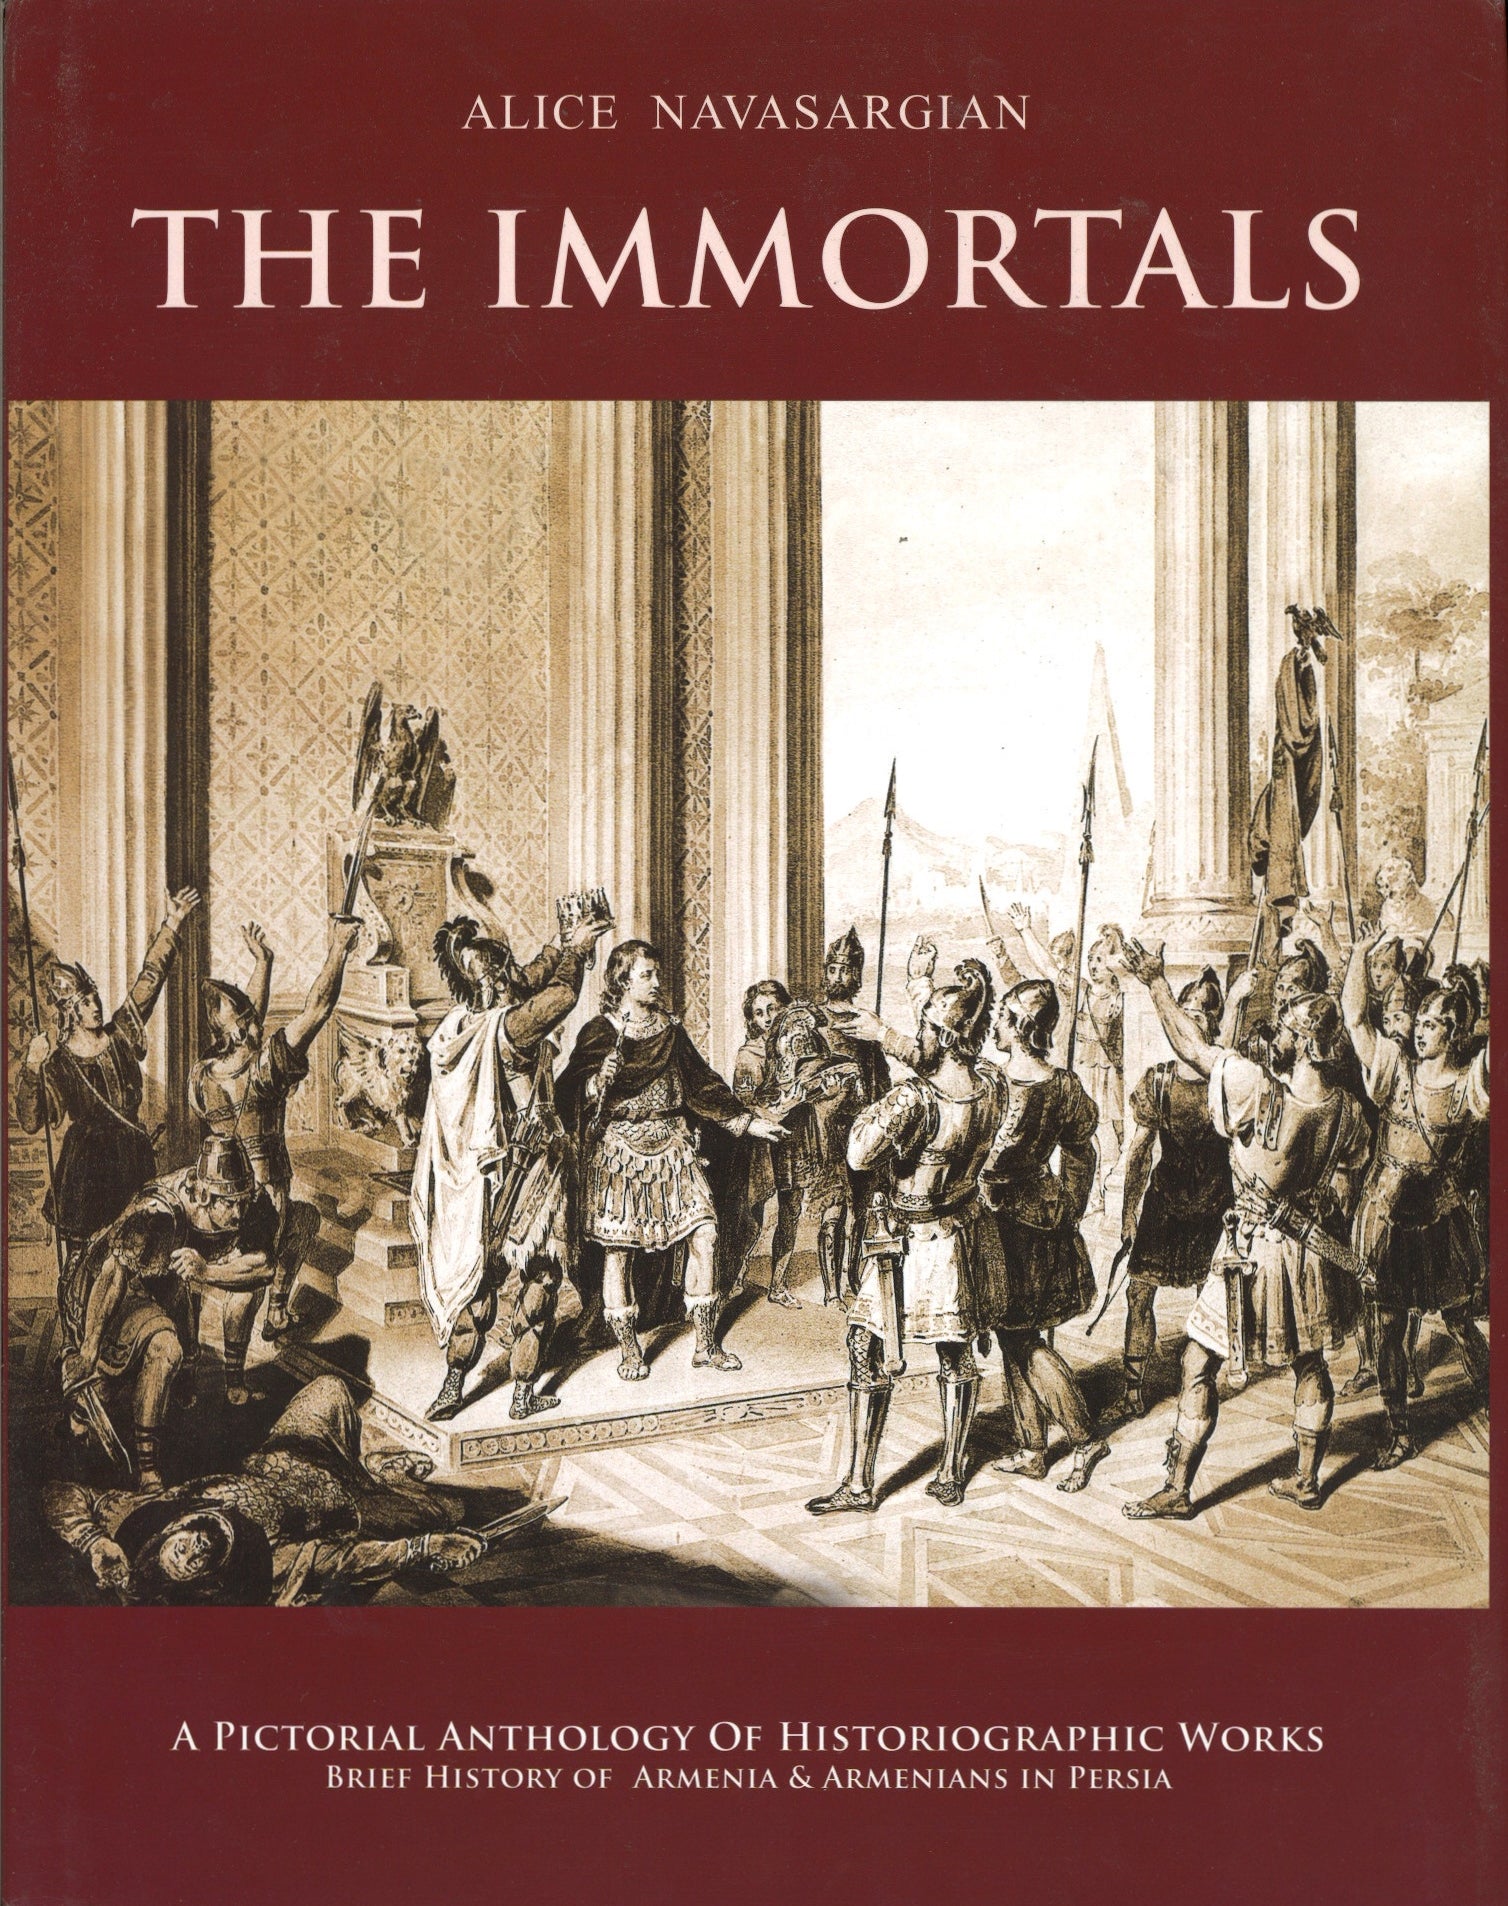 IMMORTALS: A PICTORIAL ANTHOLOGY OF HISTORIOGRAPHIC WORKS